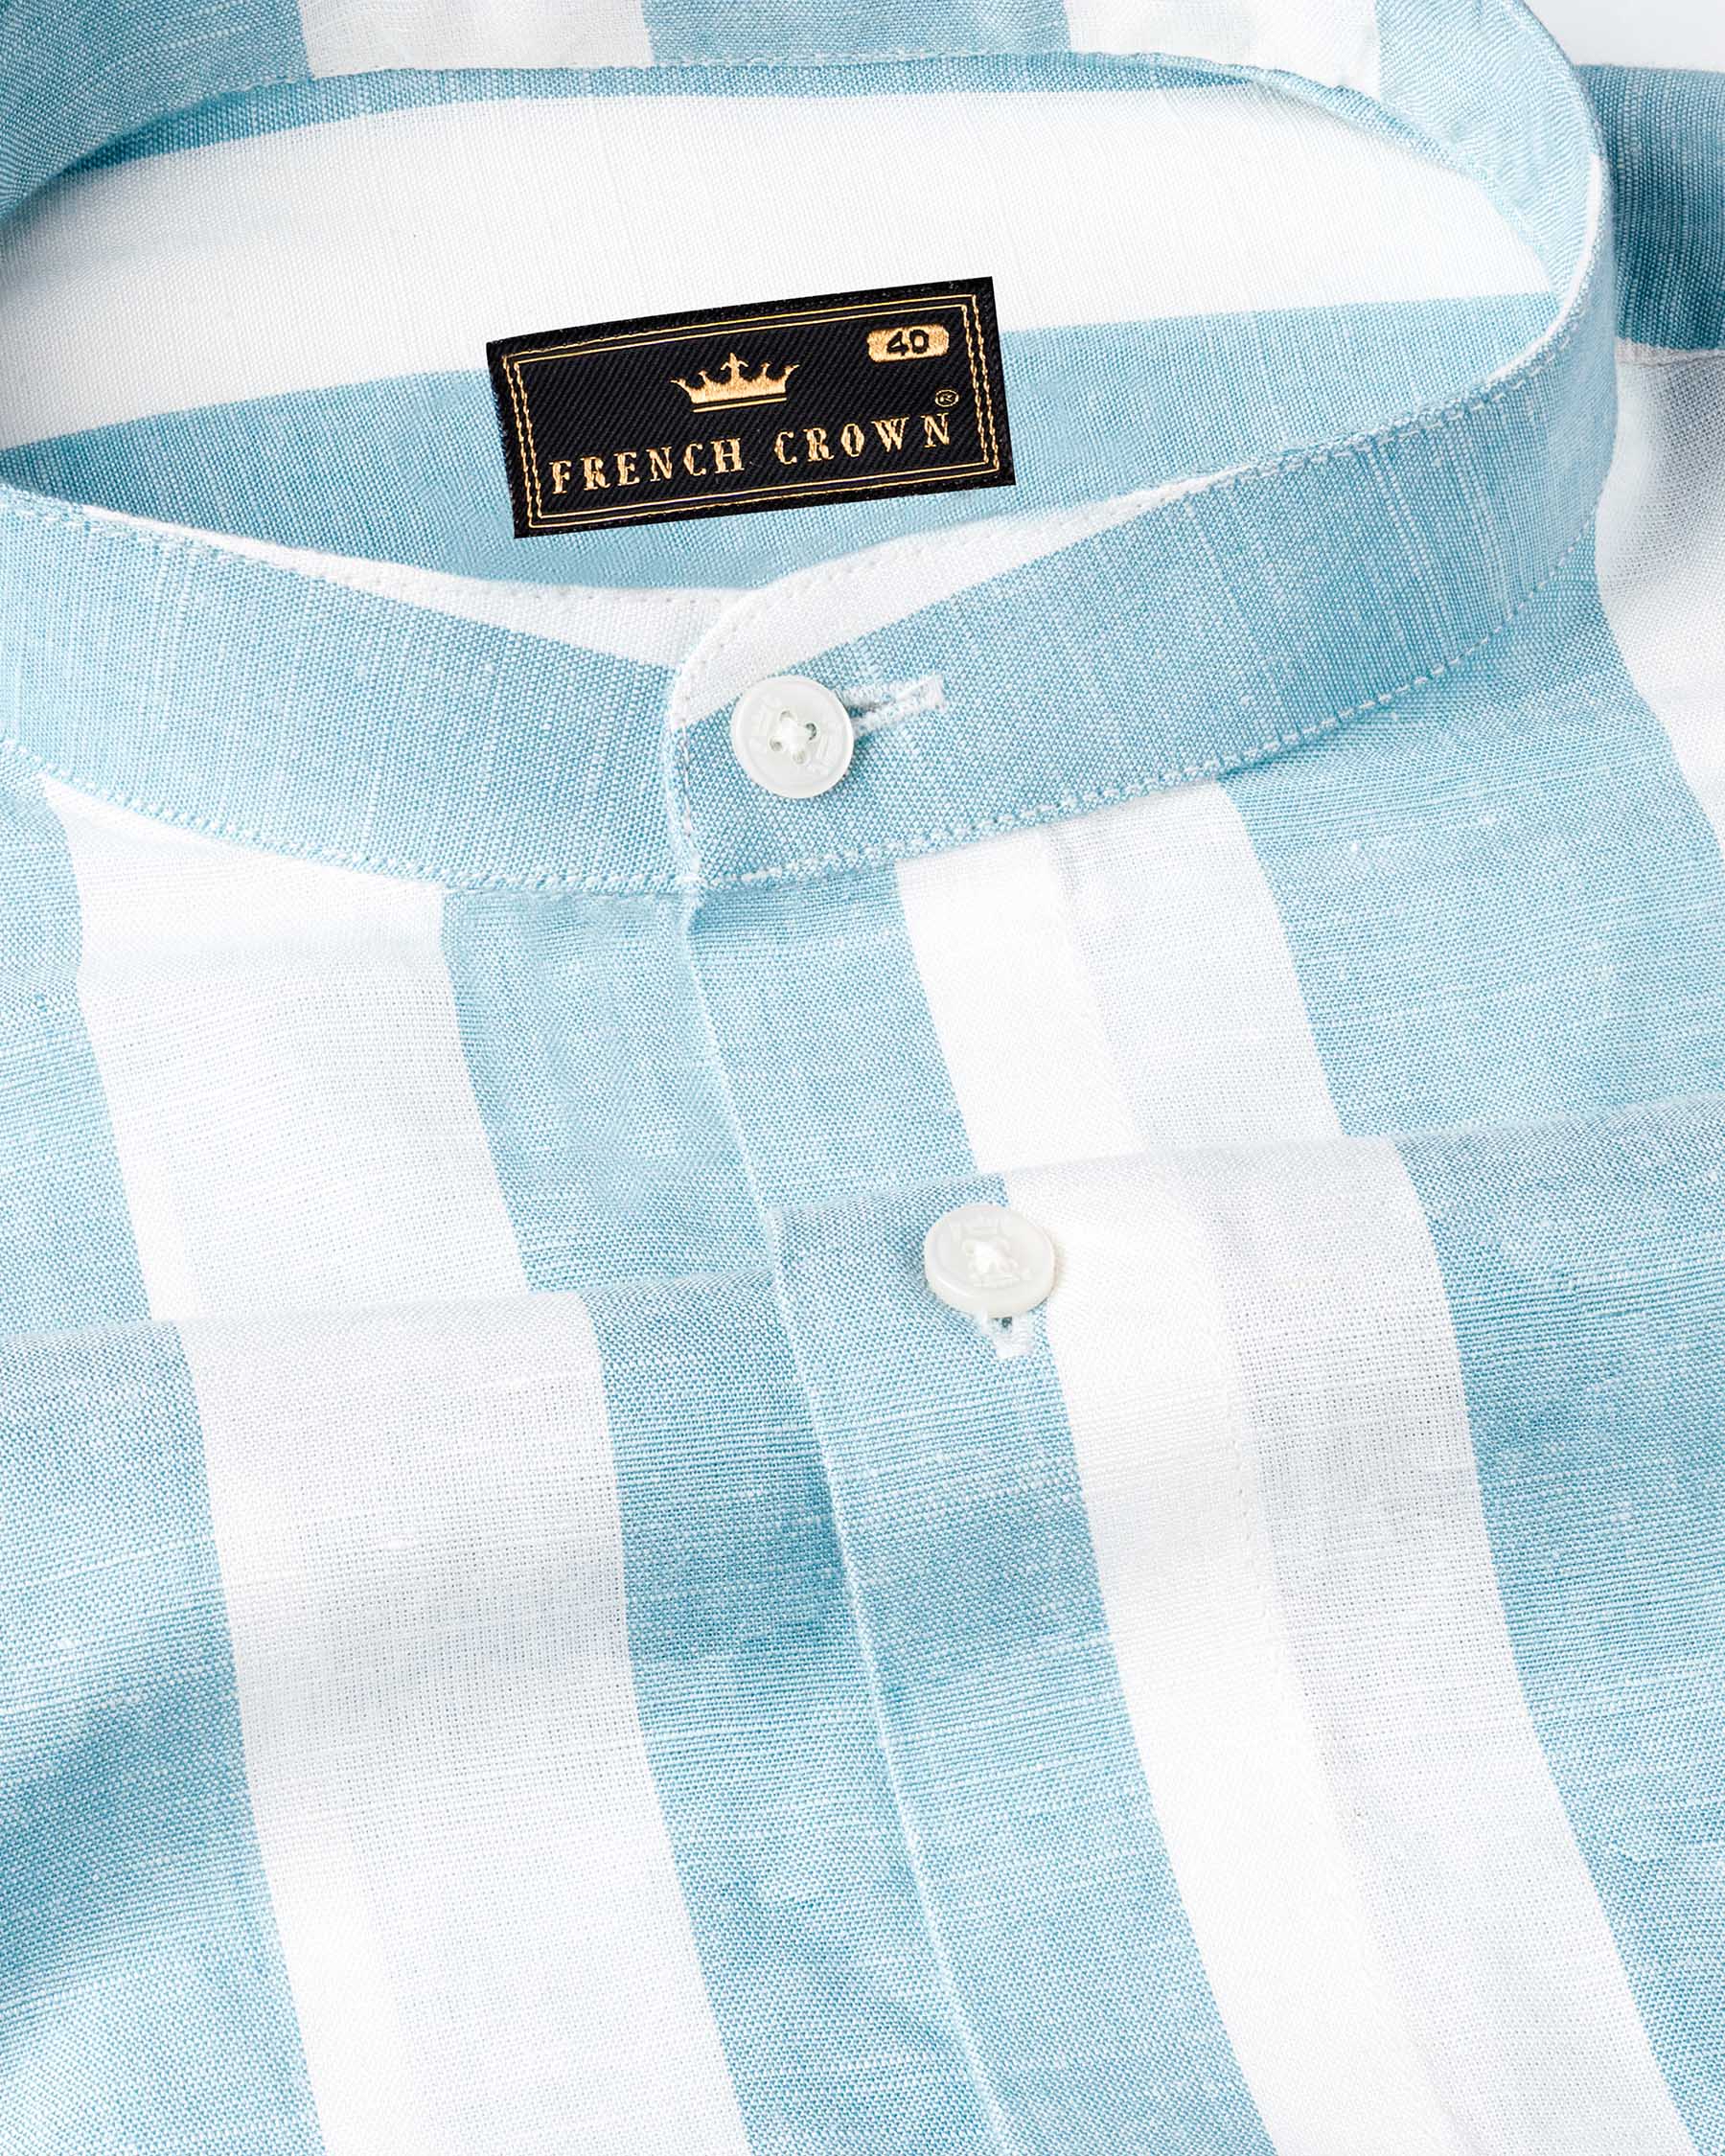 Bright White And Regent St Blue Luxurious Linen Shirt 7109-M-38,7109-M-38,7109-M-39,7109-M-39,7109-M-40,7109-M-40,7109-M-42,7109-M-42,7109-M-44,7109-M-44,7109-M-46,7109-M-46,7109-M-48,7109-M-48,7109-M-50,7109-M-50,7109-M-52,7109-M-52